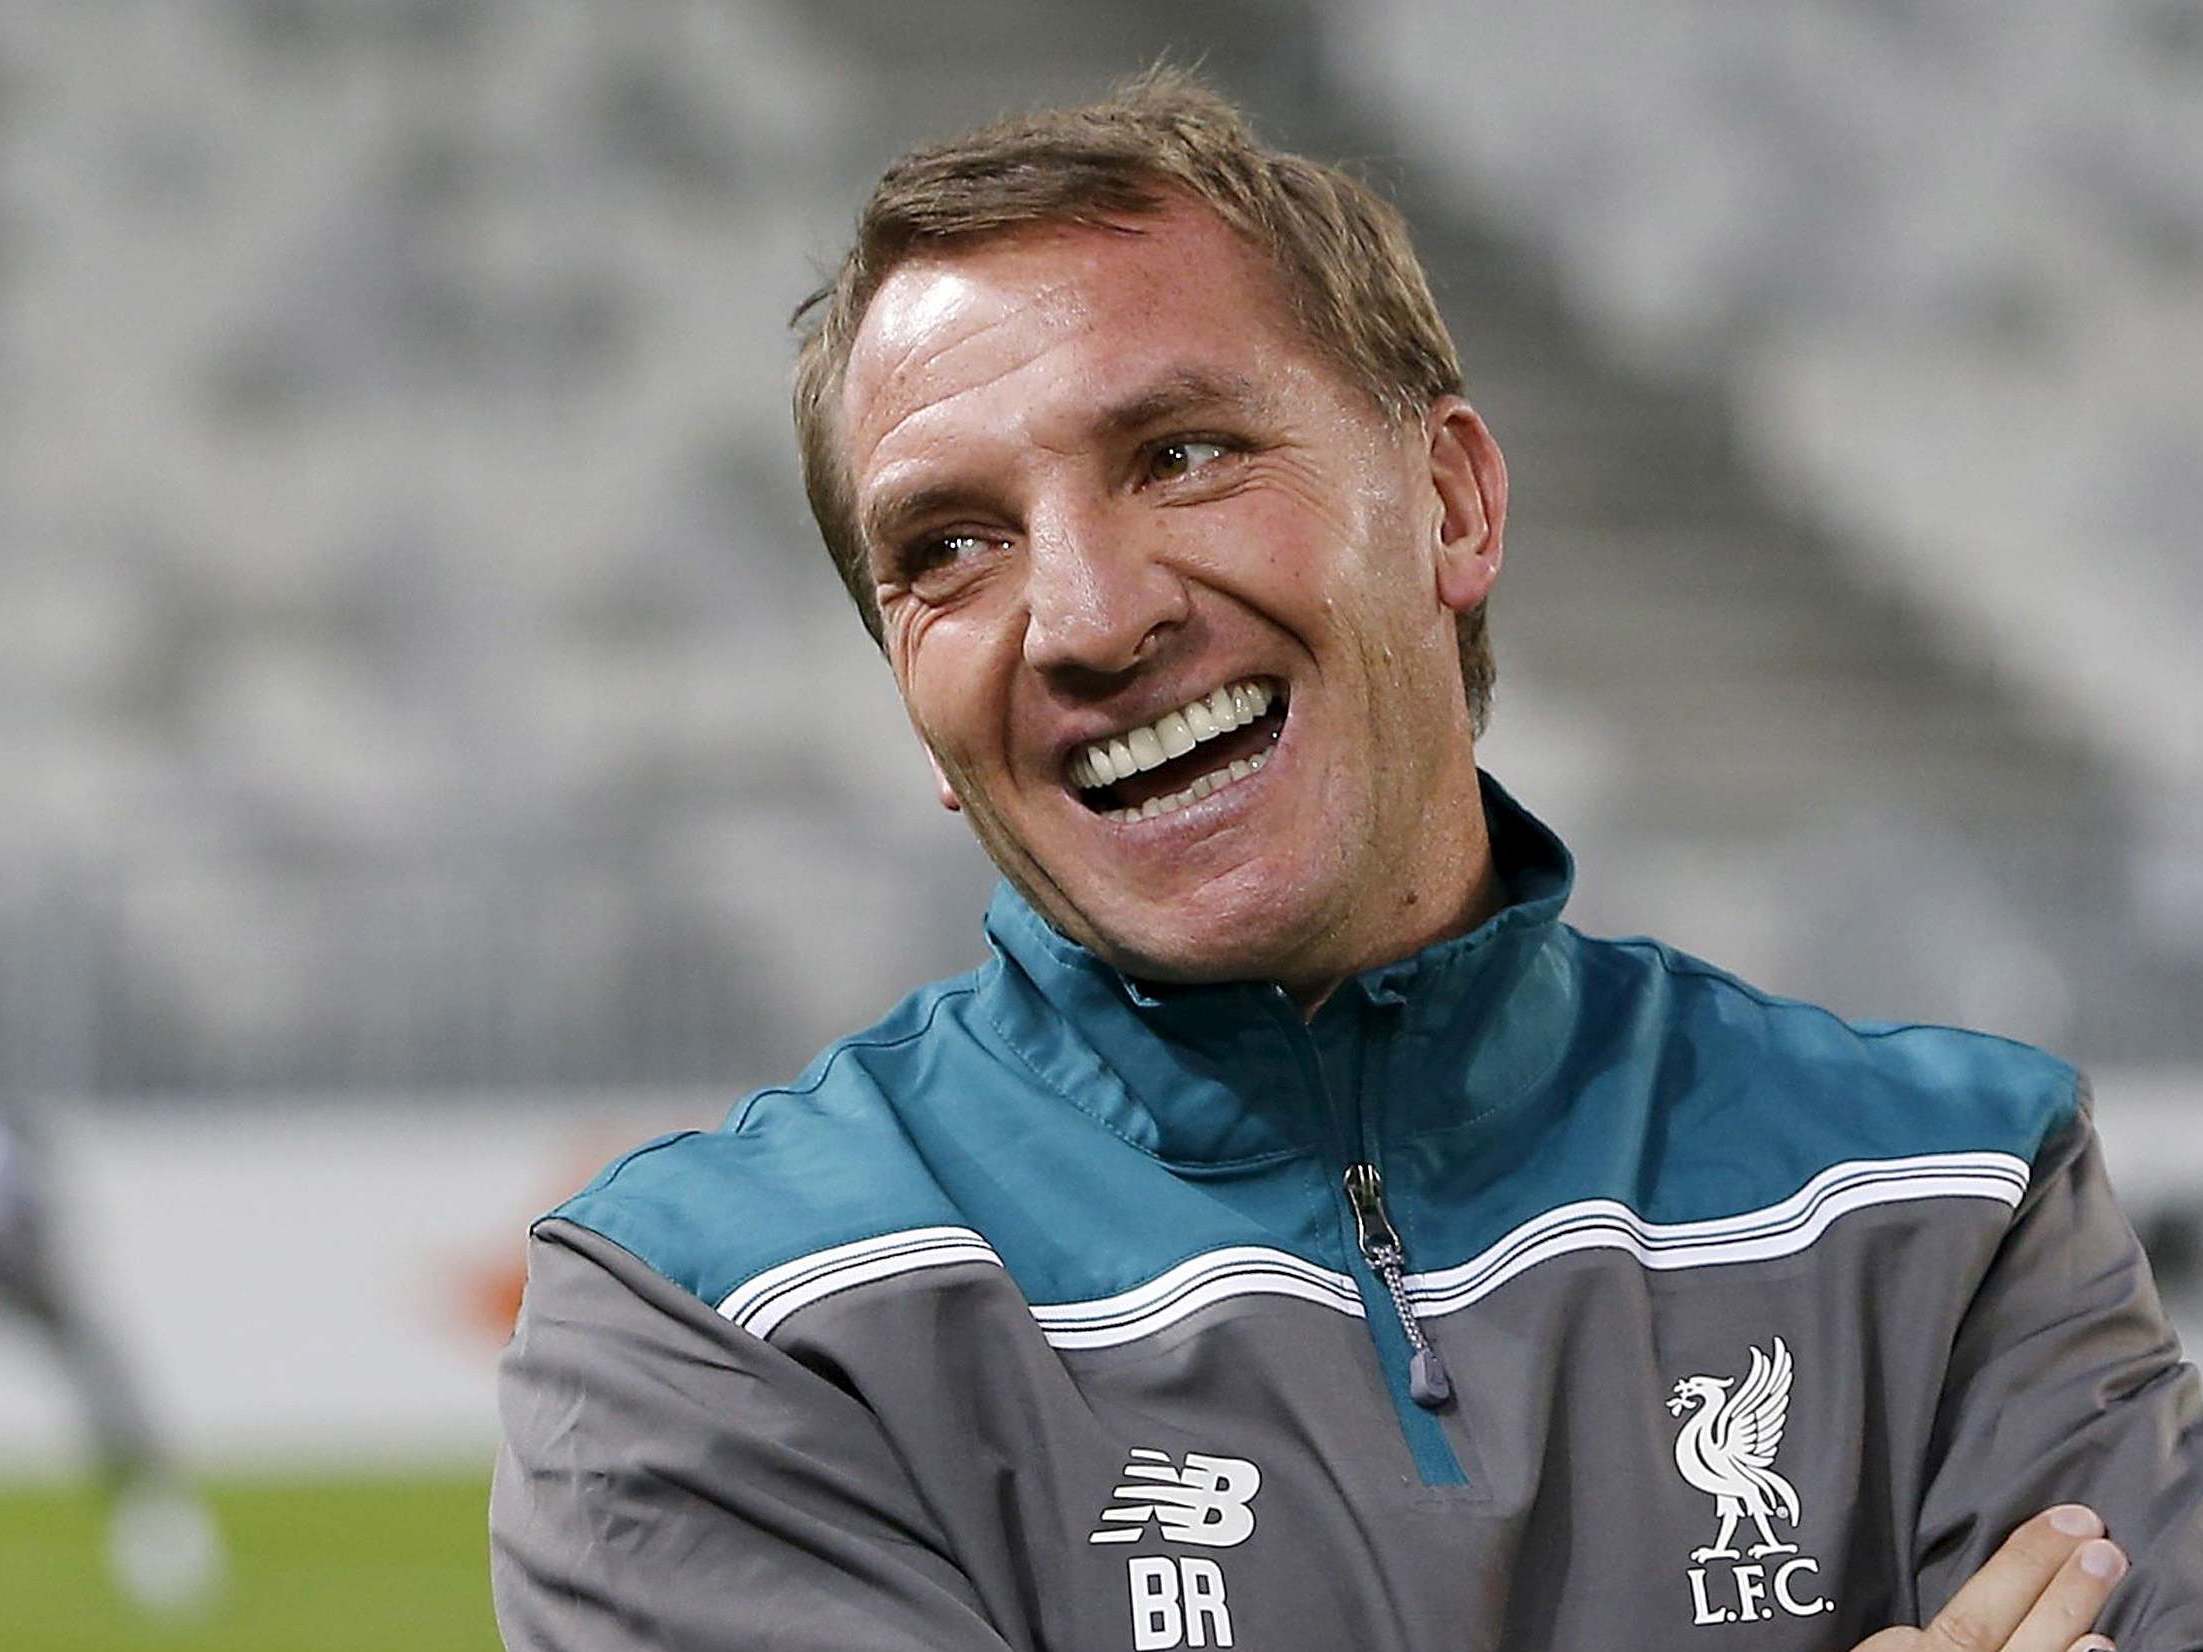 Brendan Rodgers has matured since his time at Liverpool